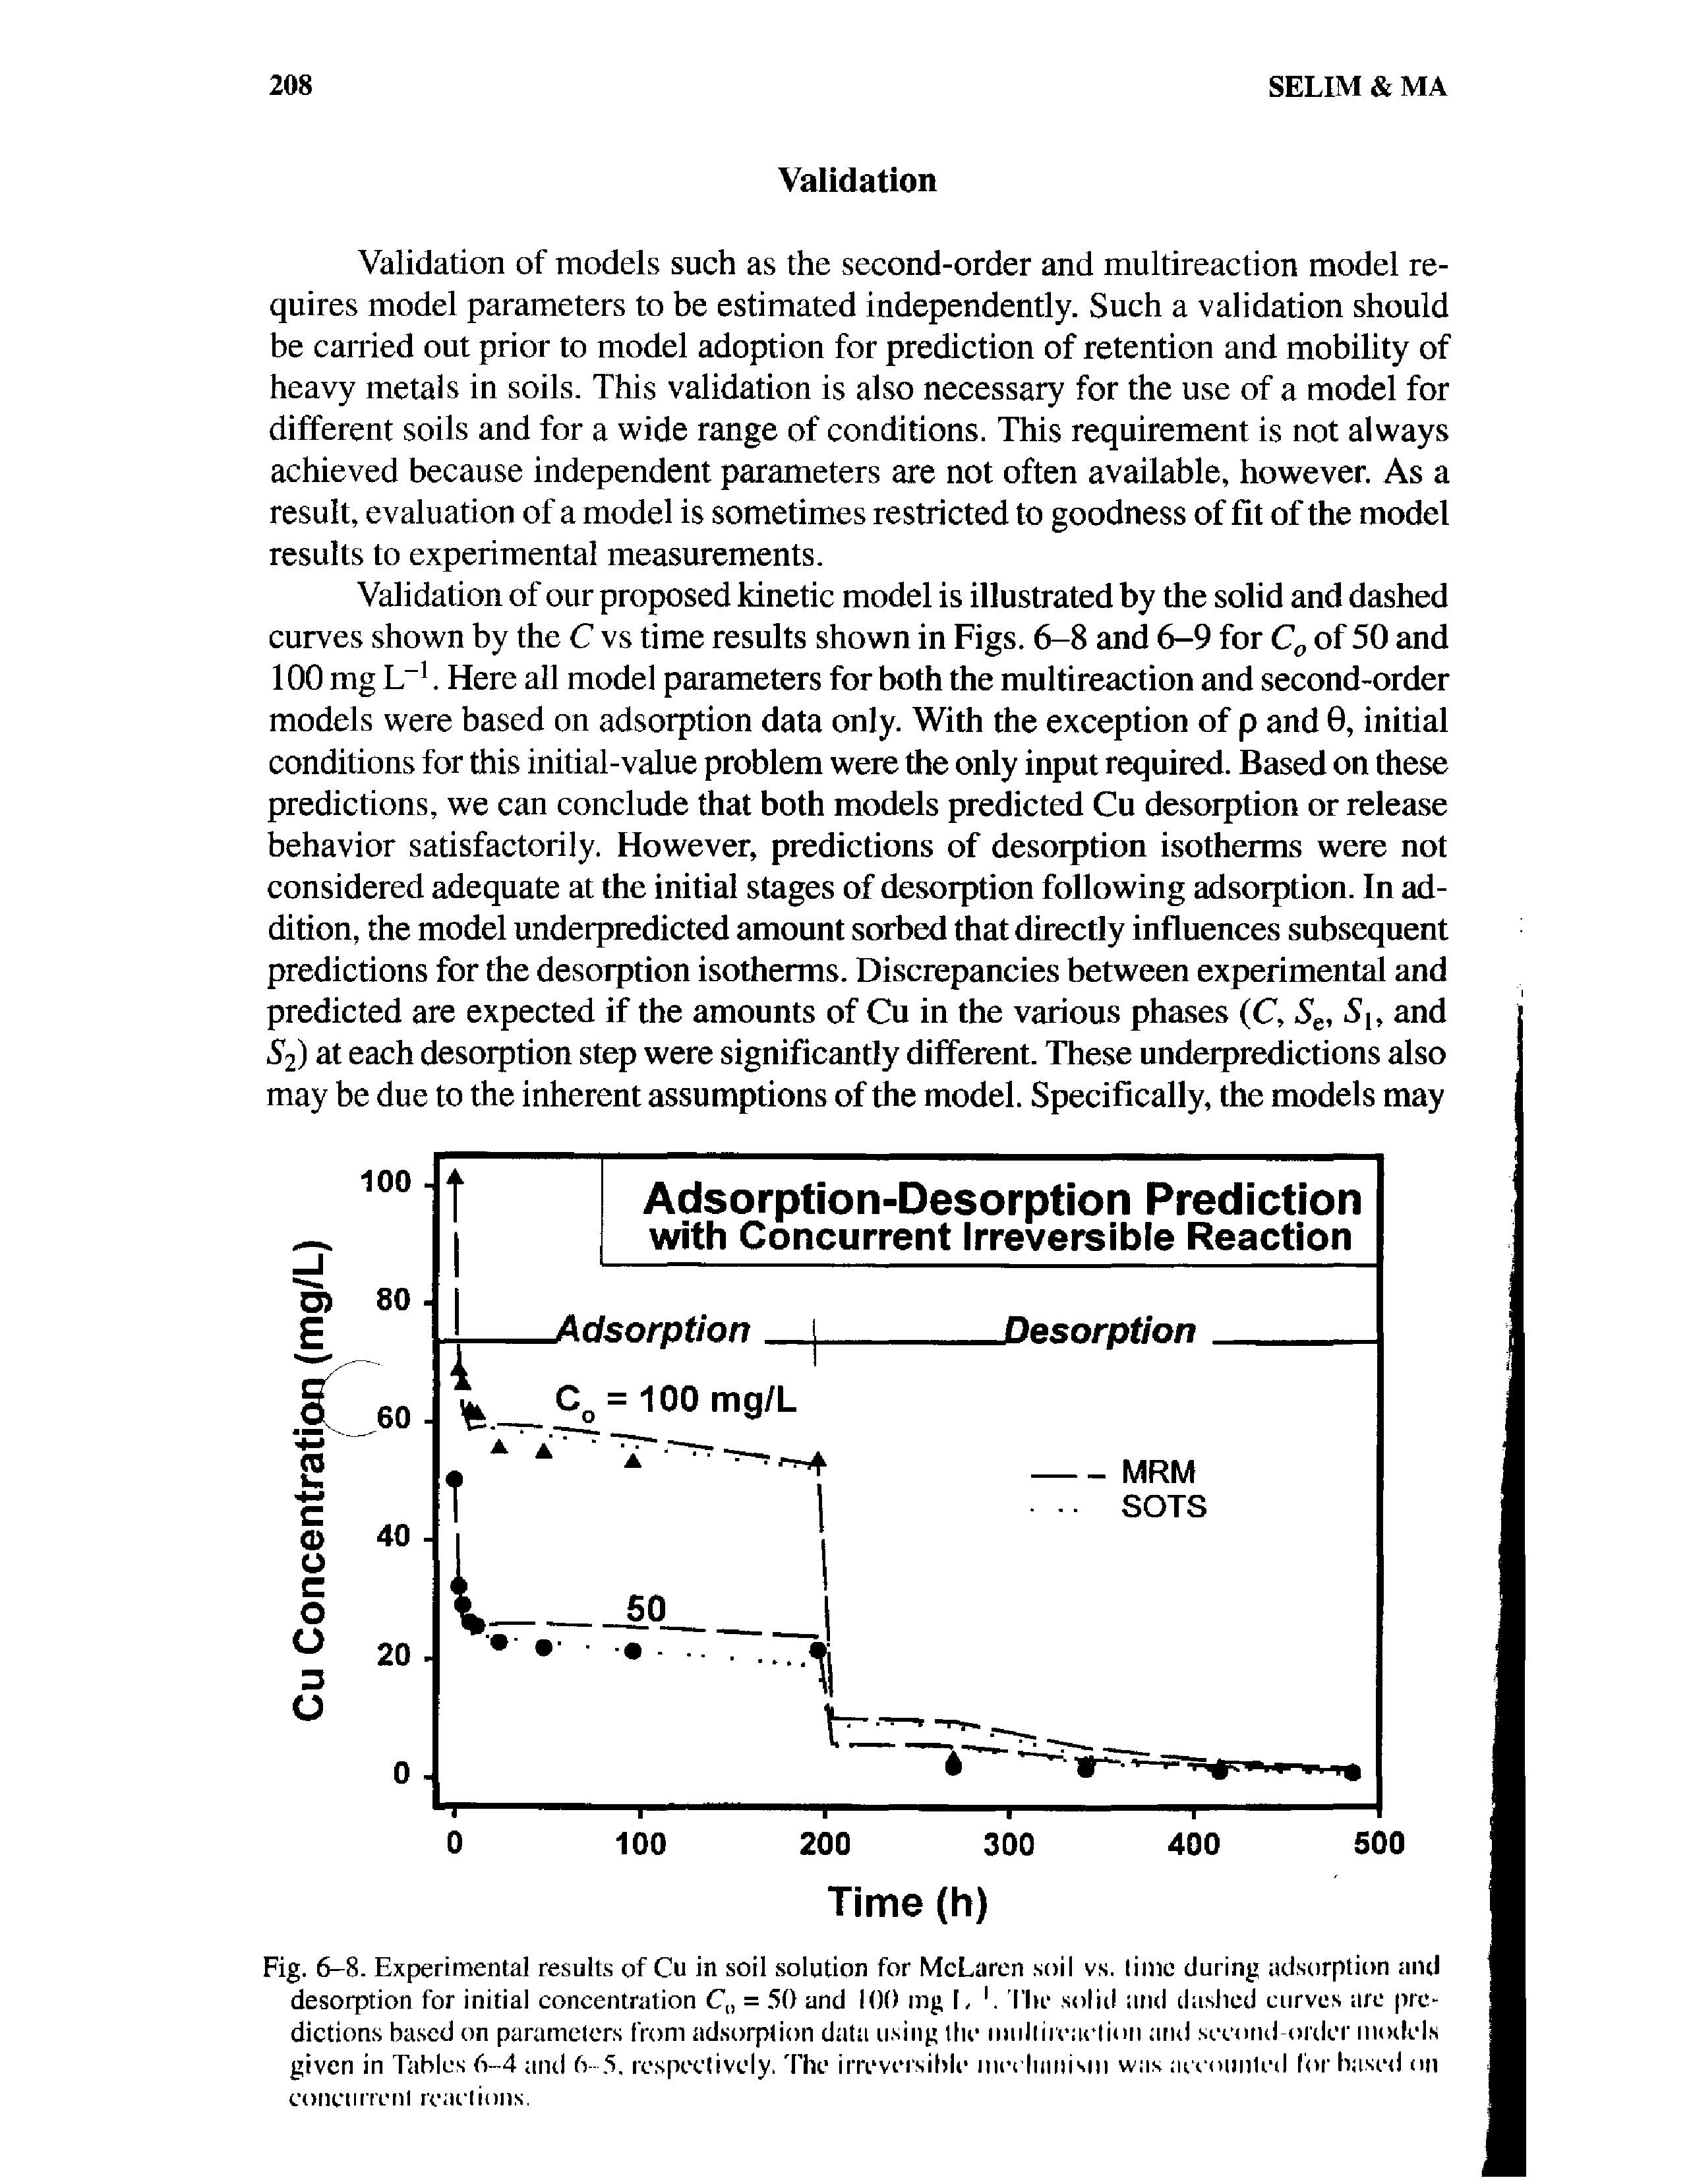 Fig. 6-8. Experimental results of Cu in soil solution for McLaren soil vs. lime during adsorption and desorption for initial concentration C = 50 and 100 mg I, The solid and dashed curves are predictions based on parameters from adsorption data using the imilliiouclion and second-order models given in Tables 6-4 and 6-5, respectively. The irreversible mechanism was accounted for based on concurrent reactions.